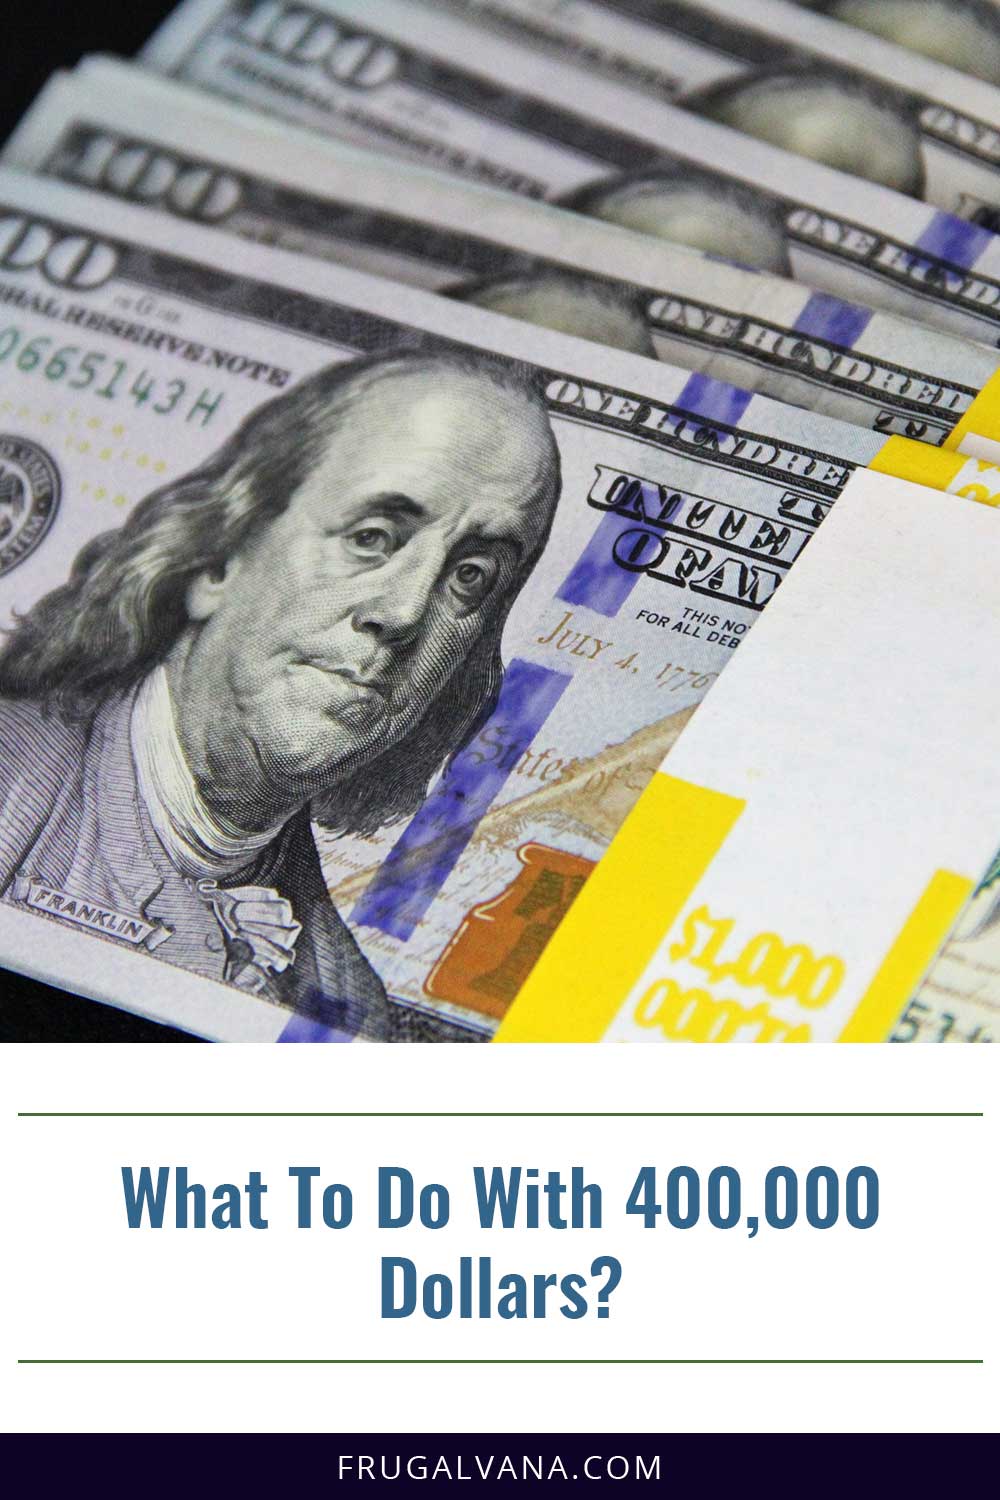 What To Do With 400,000 Dollars?